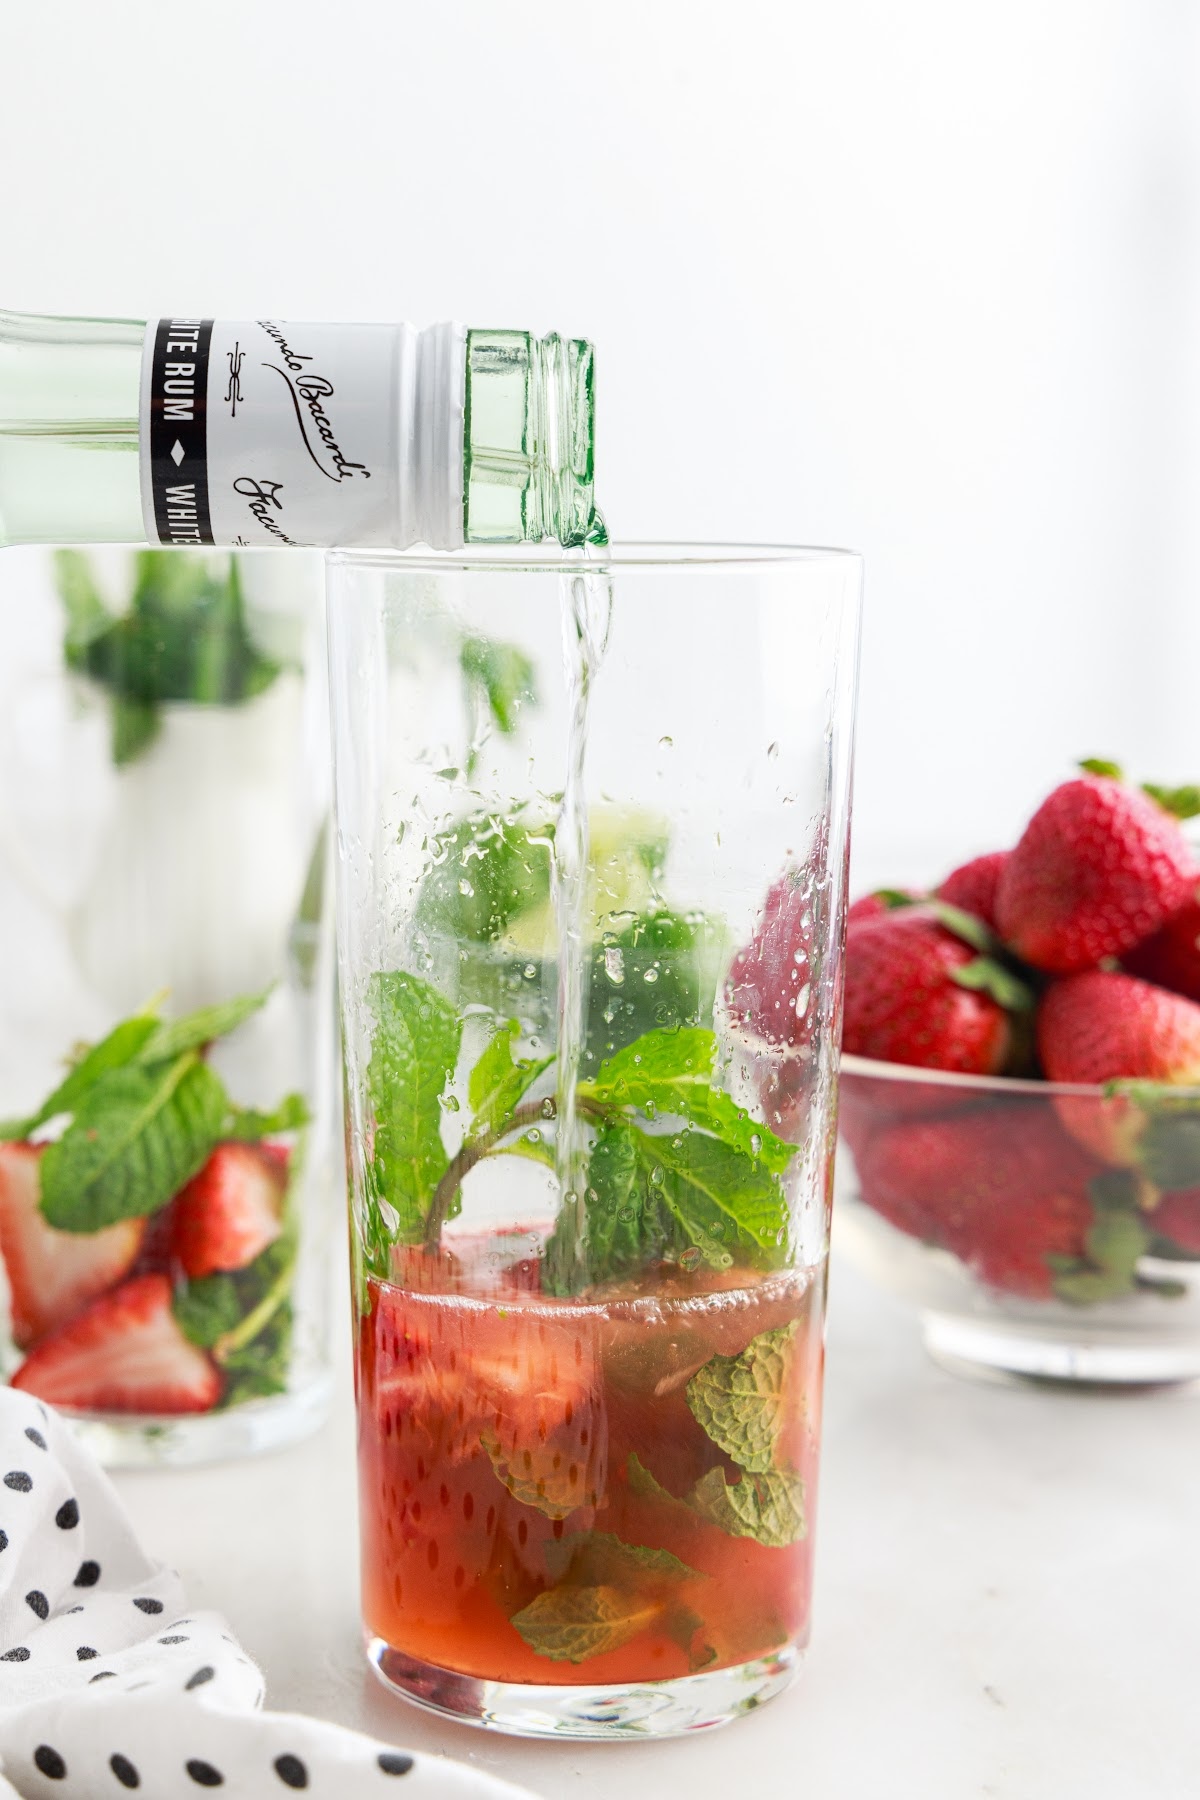 Rum added to ingredients in a tall glass to make a Strawberry Mojito.